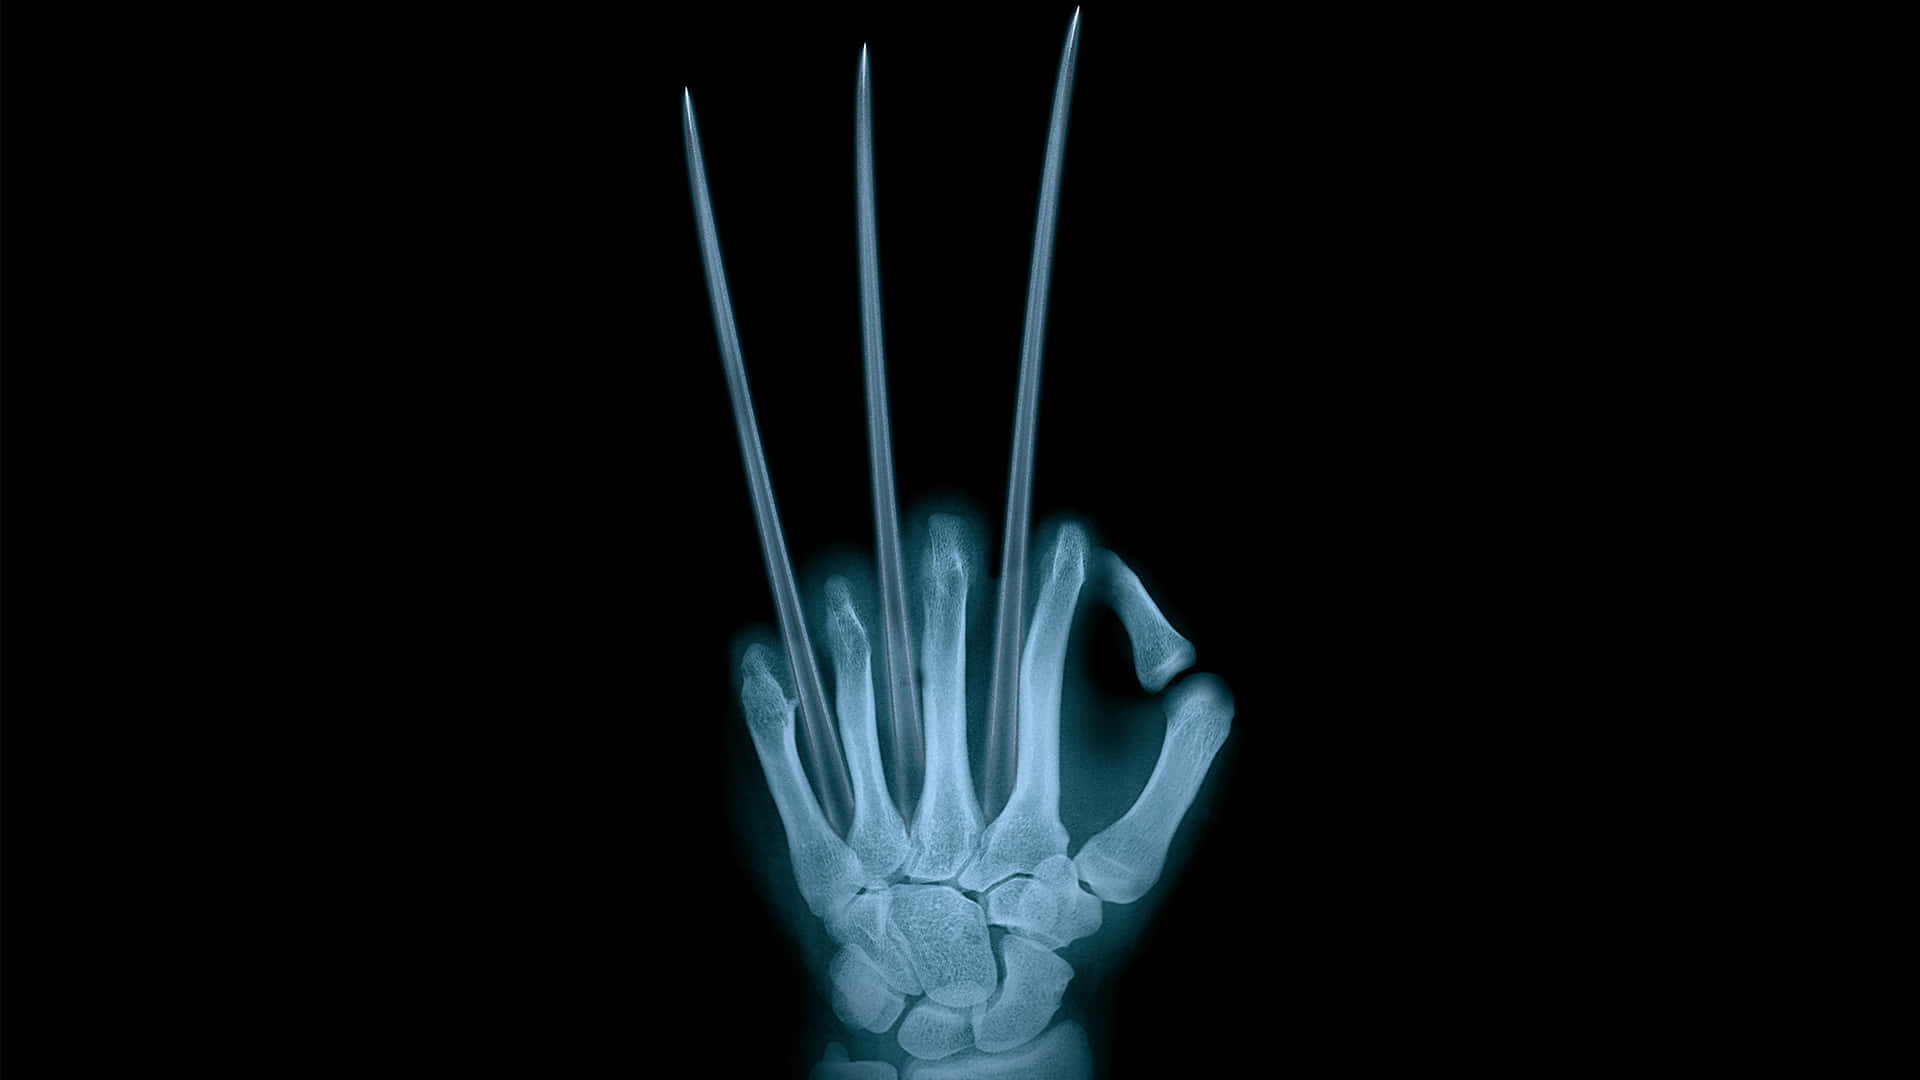 Wolverine's Hand In X-ray Wallpaper